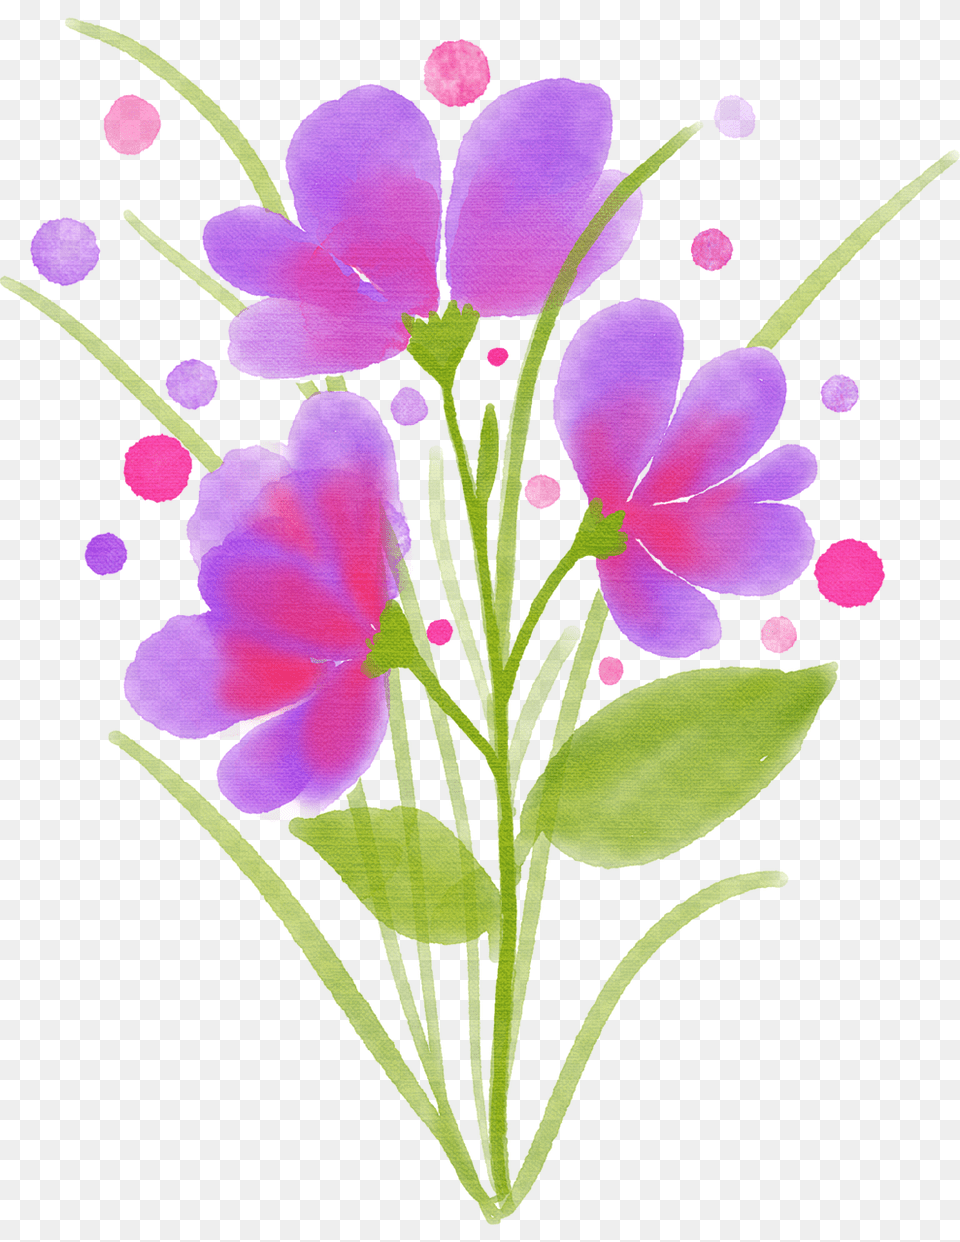 Watercolor Flower Watercolour On Pixabay, Art, Floral Design, Graphics, Pattern Png Image